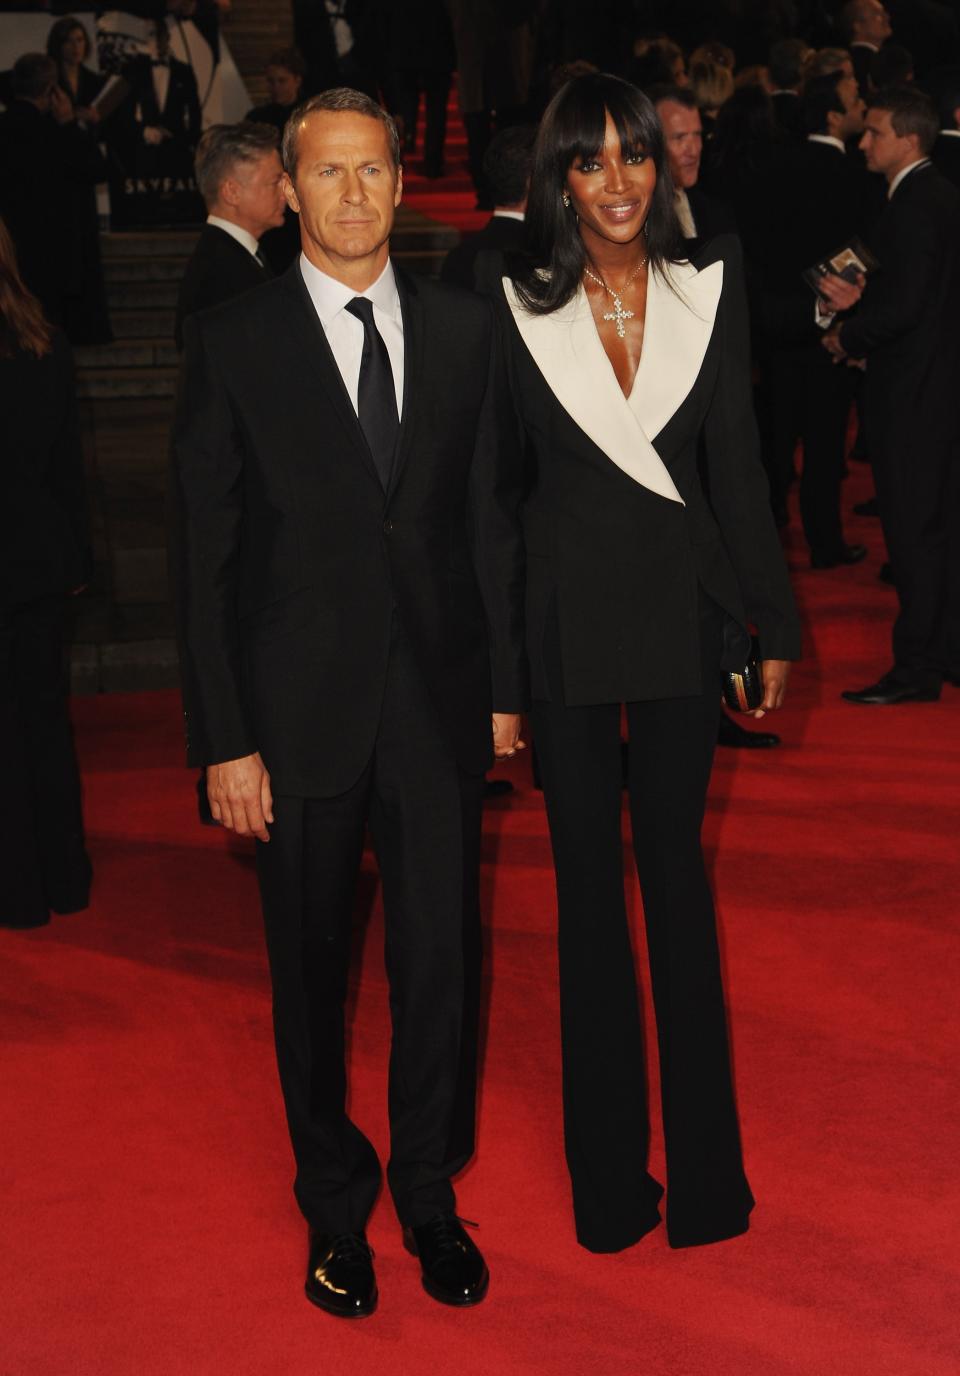 LONDON, ENGLAND - OCTOBER 23: Vladislav Doronin and Naomi Campbell attend the Royal World Premiere of 'Skyfall' at the Royal Albert Hall on October 23, 2012 in London, England. (Photo by Eamonn McCormack/Getty Images)